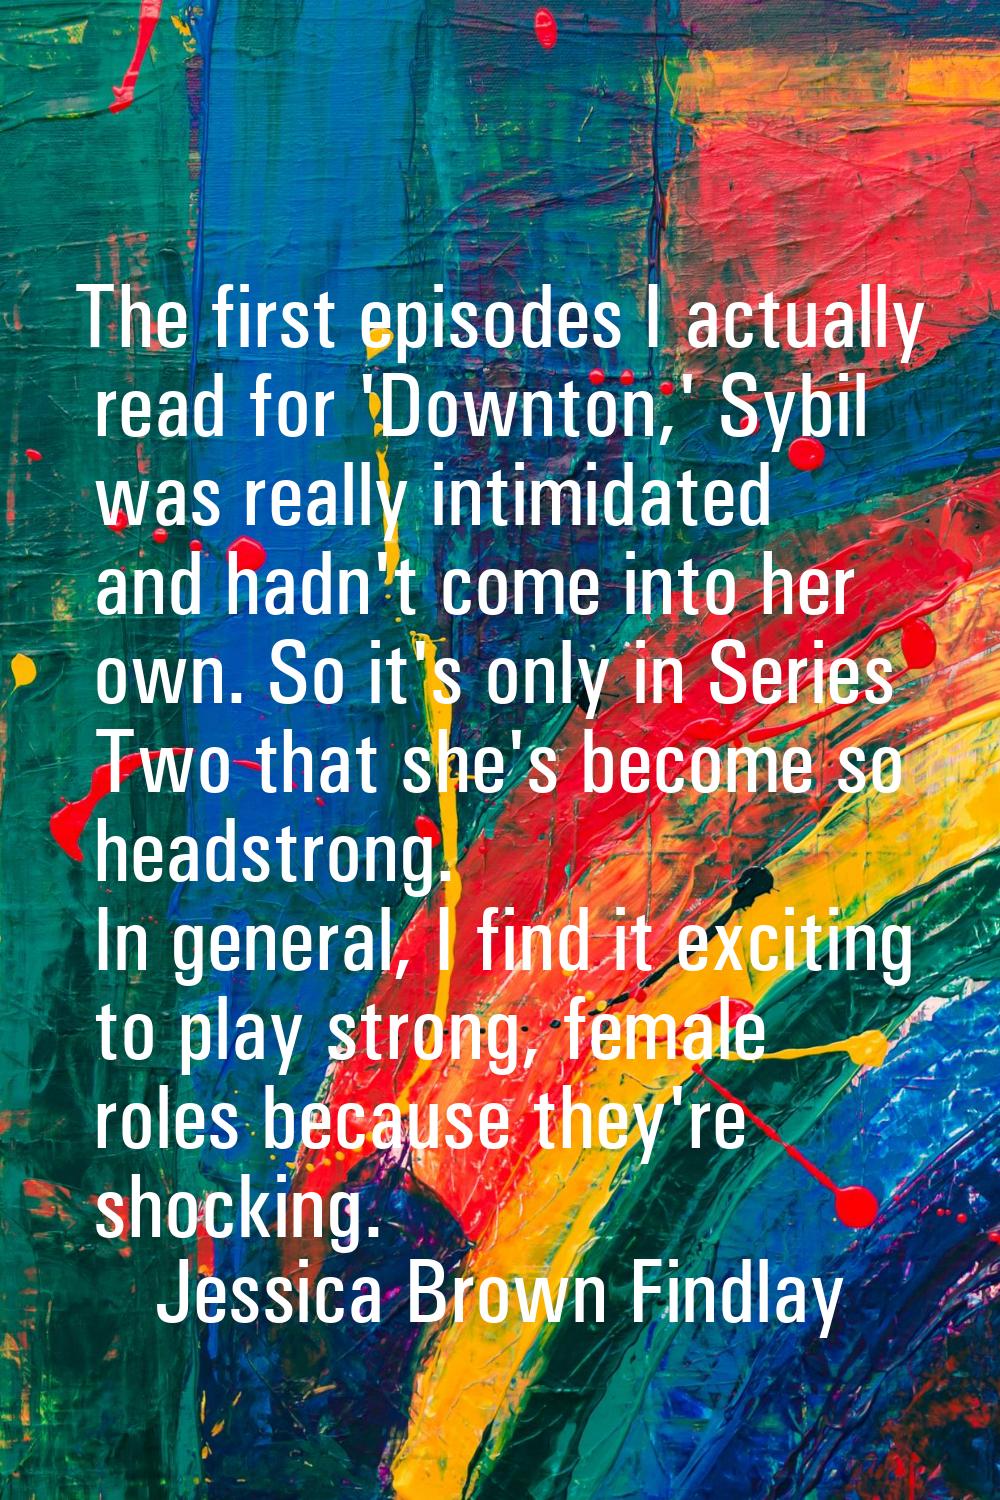 The first episodes I actually read for 'Downton,' Sybil was really intimidated and hadn't come into